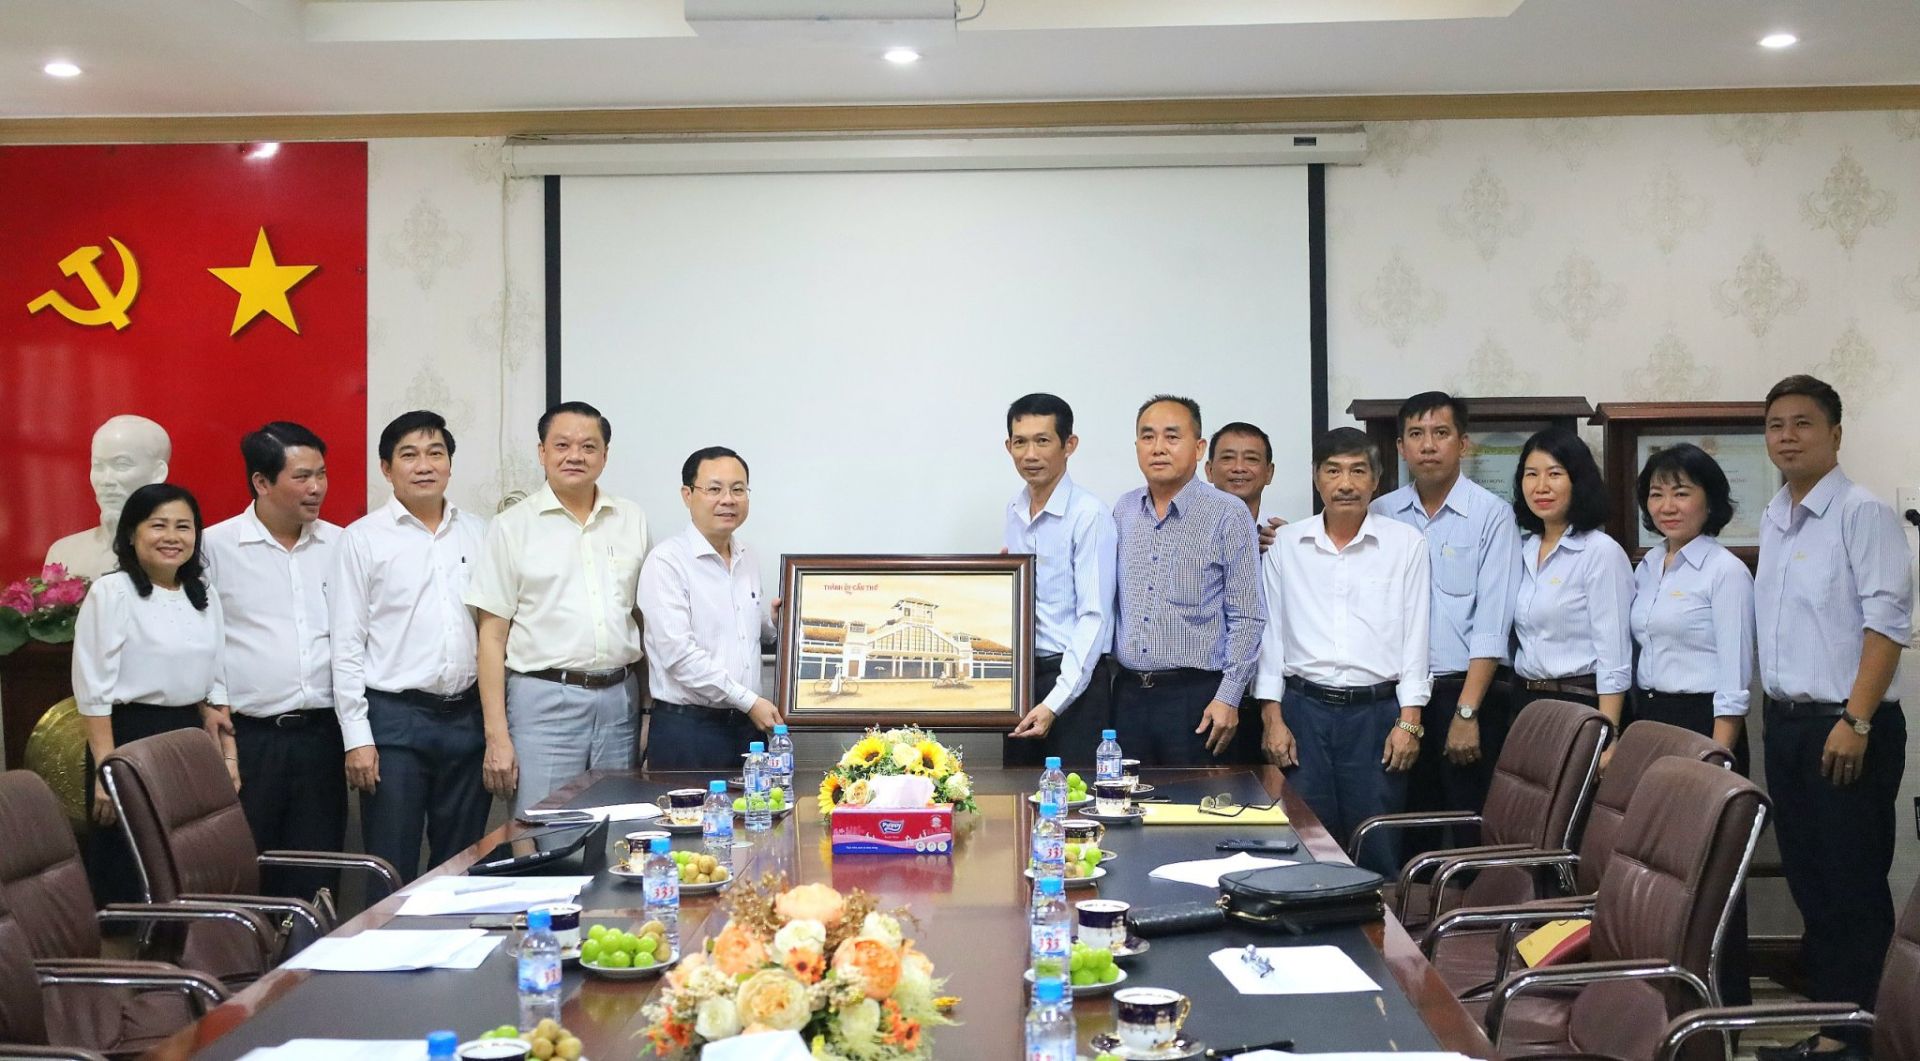 Mr. Pham Duy Tin - Head of the Management Board of Can Tho Industrial and Export Processing Zones (3rd from left to right) and the Working Group of City Leaders. Can Tho visited and worked with Saigon - Western Brewery